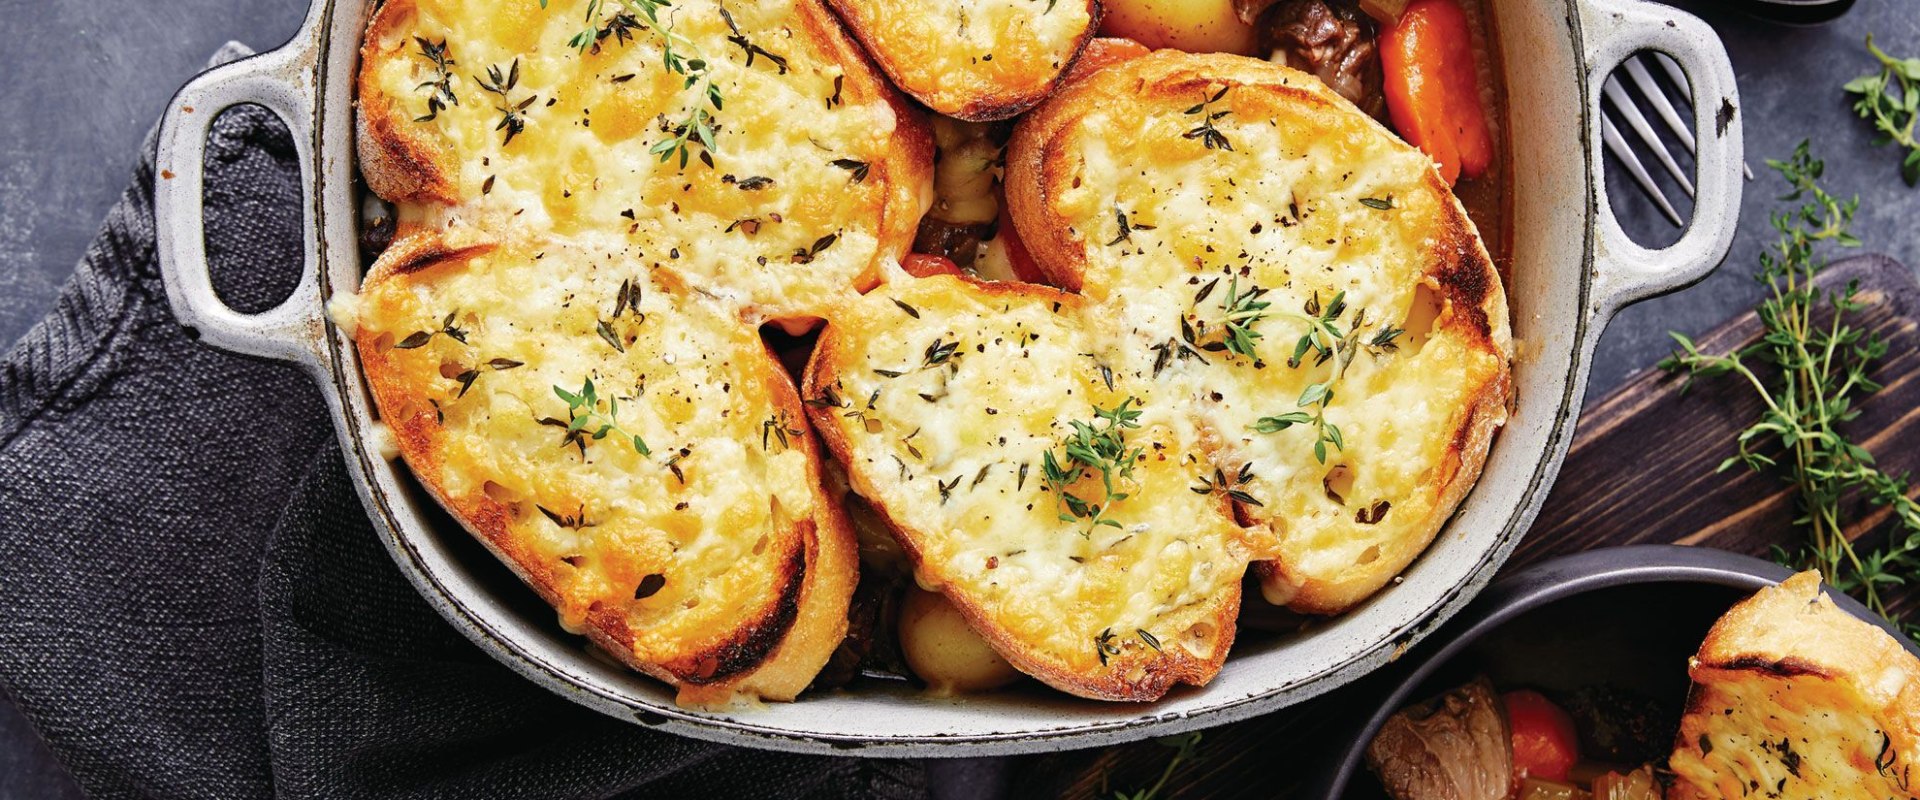 Delicious Cheese-Based Appetizers for Easy and Quick Recipes